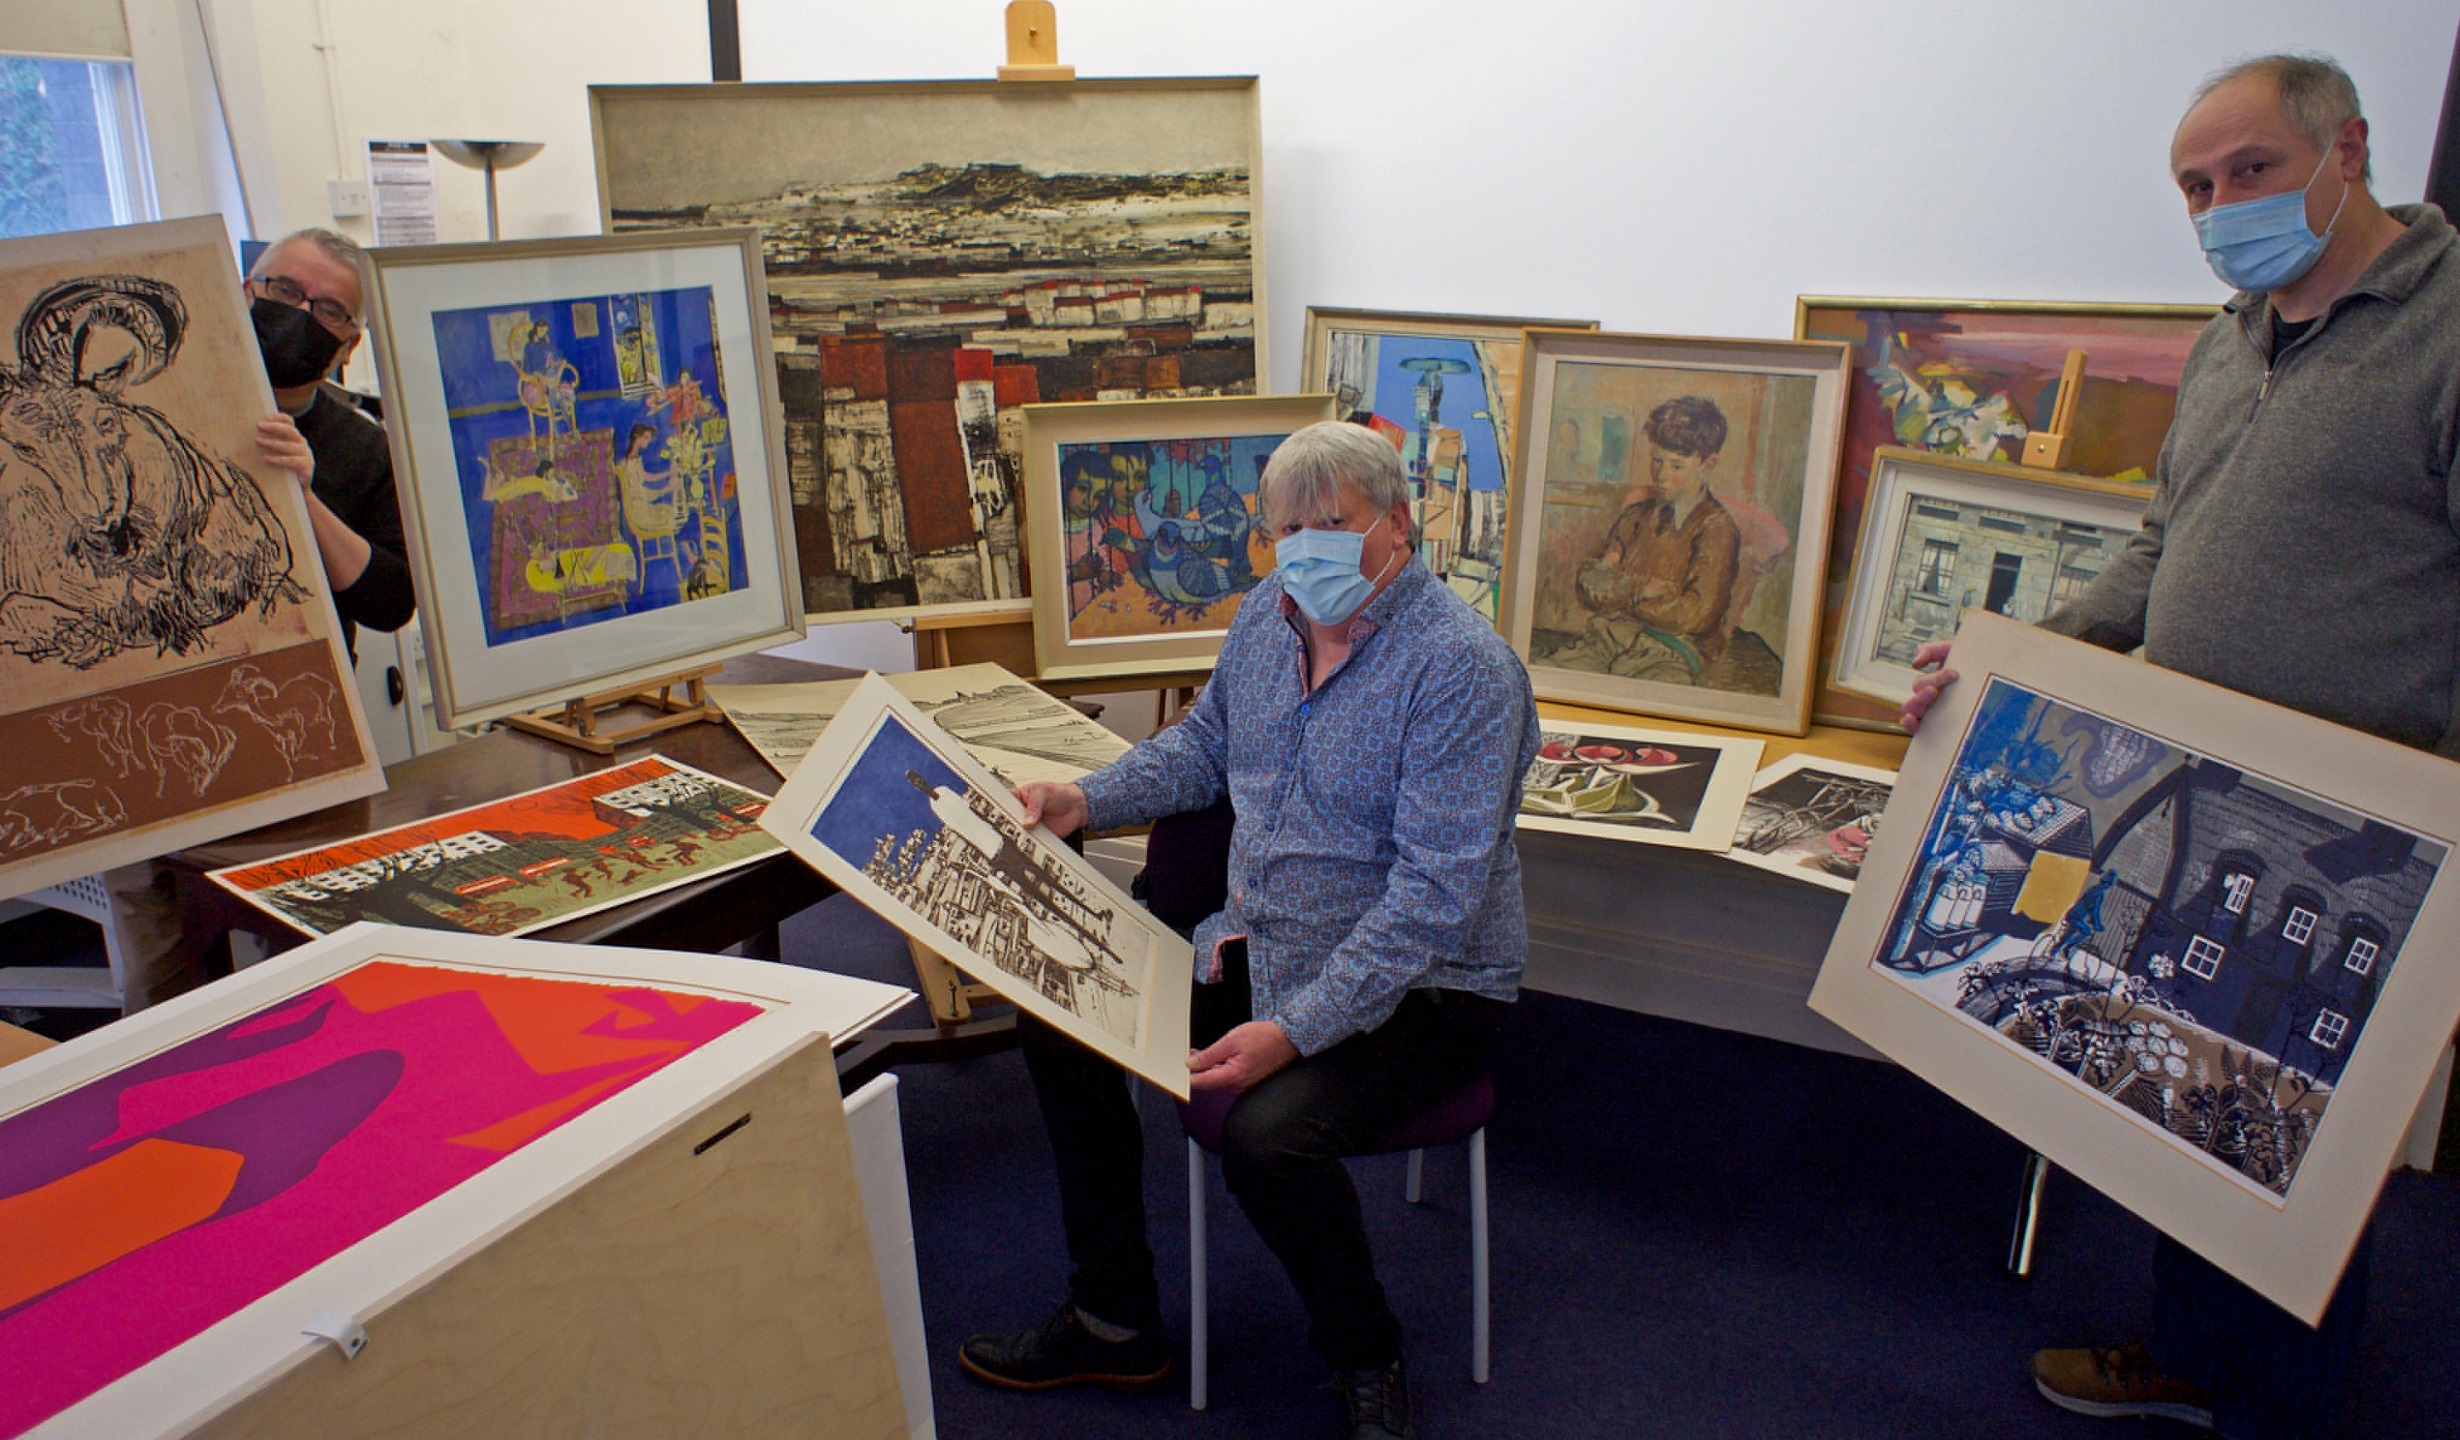 Unpacking the Derbyshire gift. Left to right: Curator Neil Holland holding a linocut print by Gertrude Hermes, Head of School of Art Professor Robert Meyrick with an etching by Julian Trevelyan, and Lifelong Learning Teacher Phil Garratt with a linocut by Edward Bawden. The background includes works by Edward Middleditch, Ernest Perry, Patrick Heron and L S Lowry.